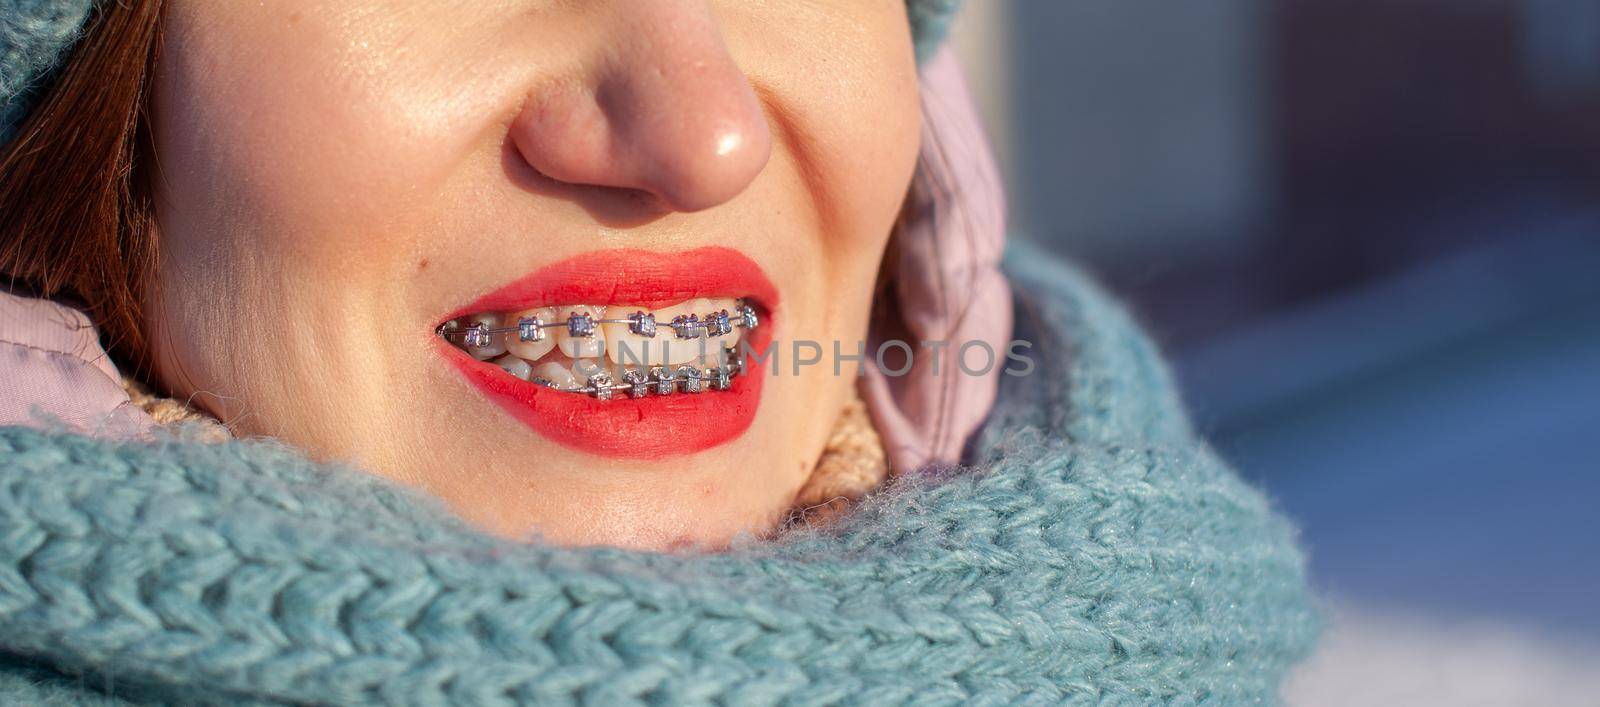 The girl has braces on her teeth. A girl in the winter on the street smiles and braces are visible on her teeth. Smooth teeth from the installation of braces